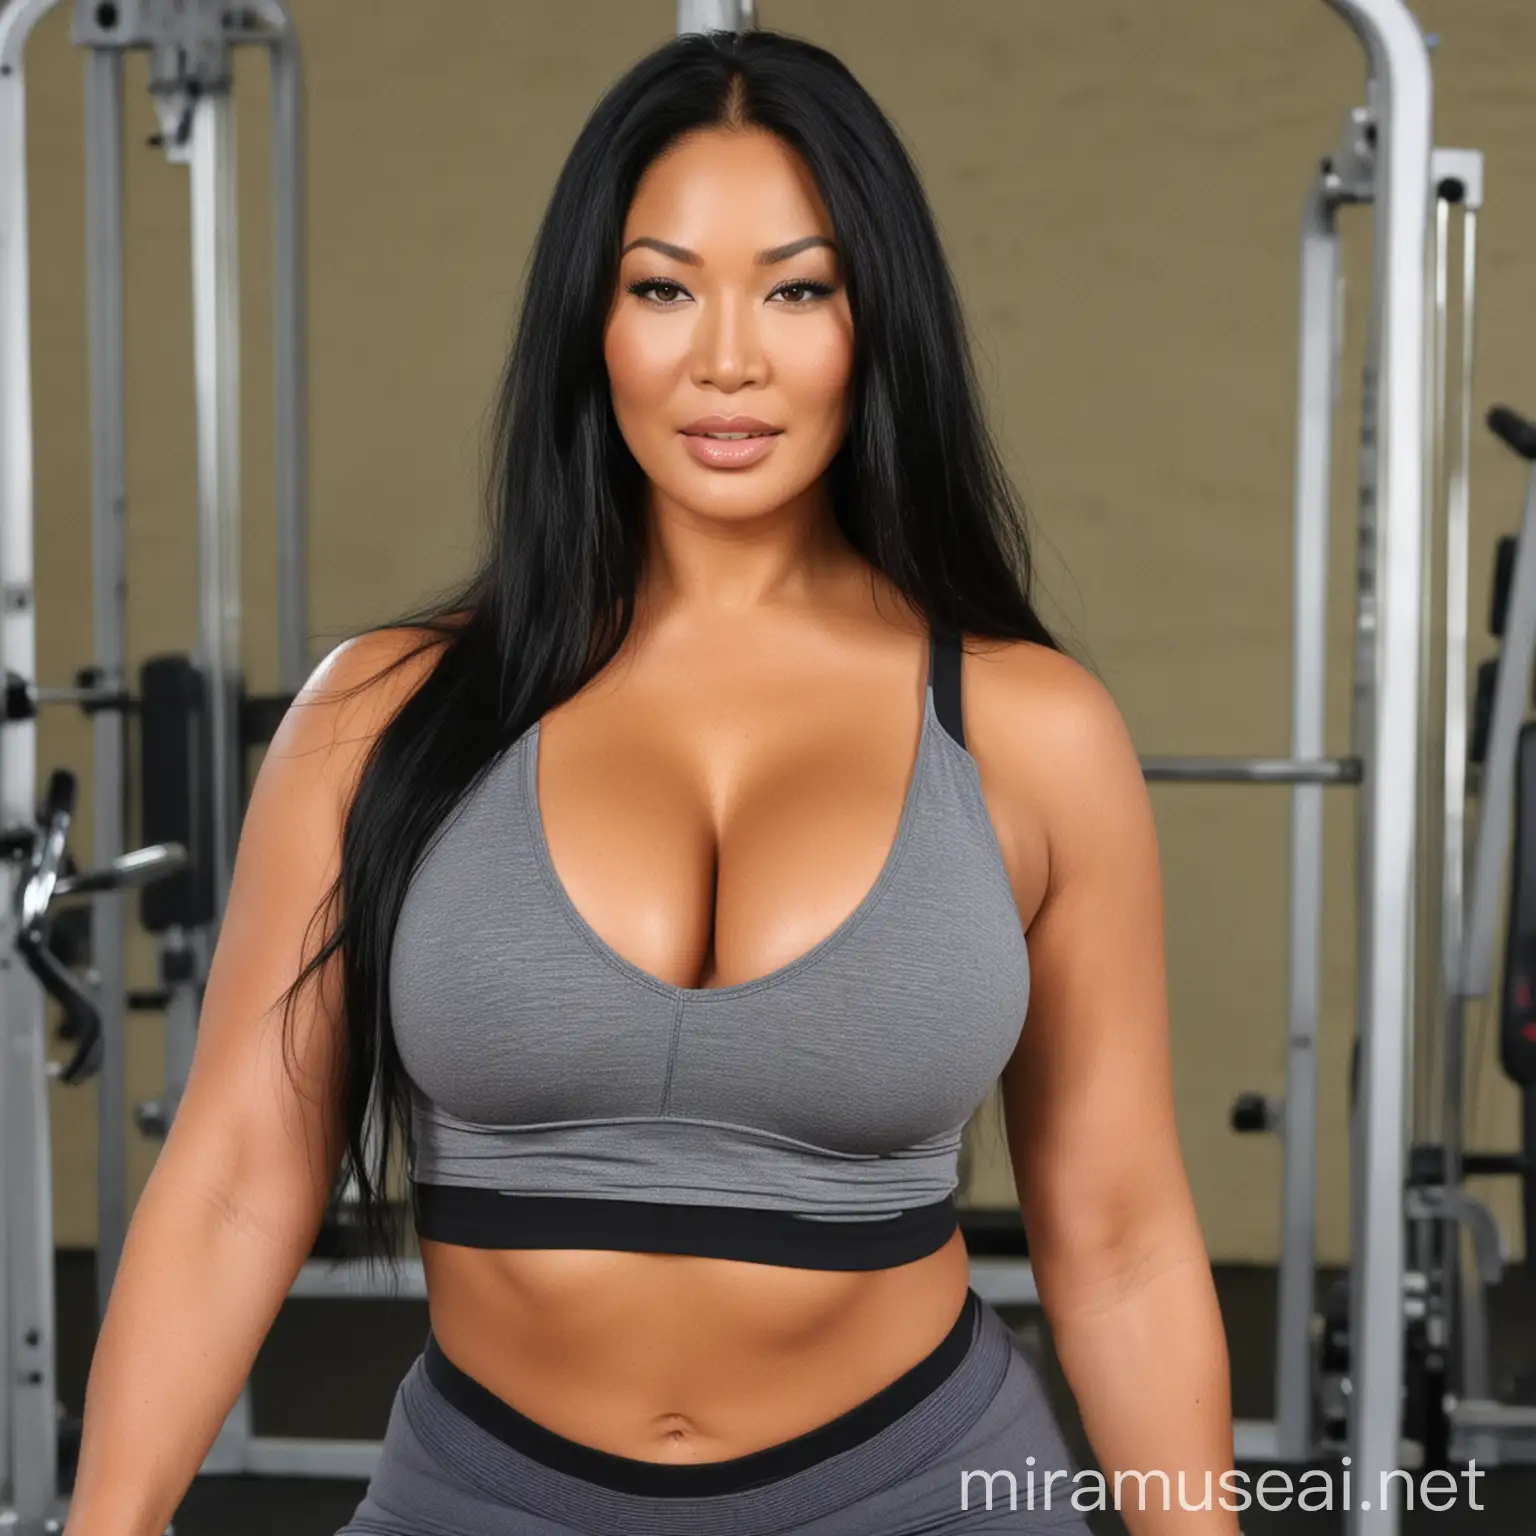 Kimora Lee Simmons Flaunting Cleavage in Gym Attire